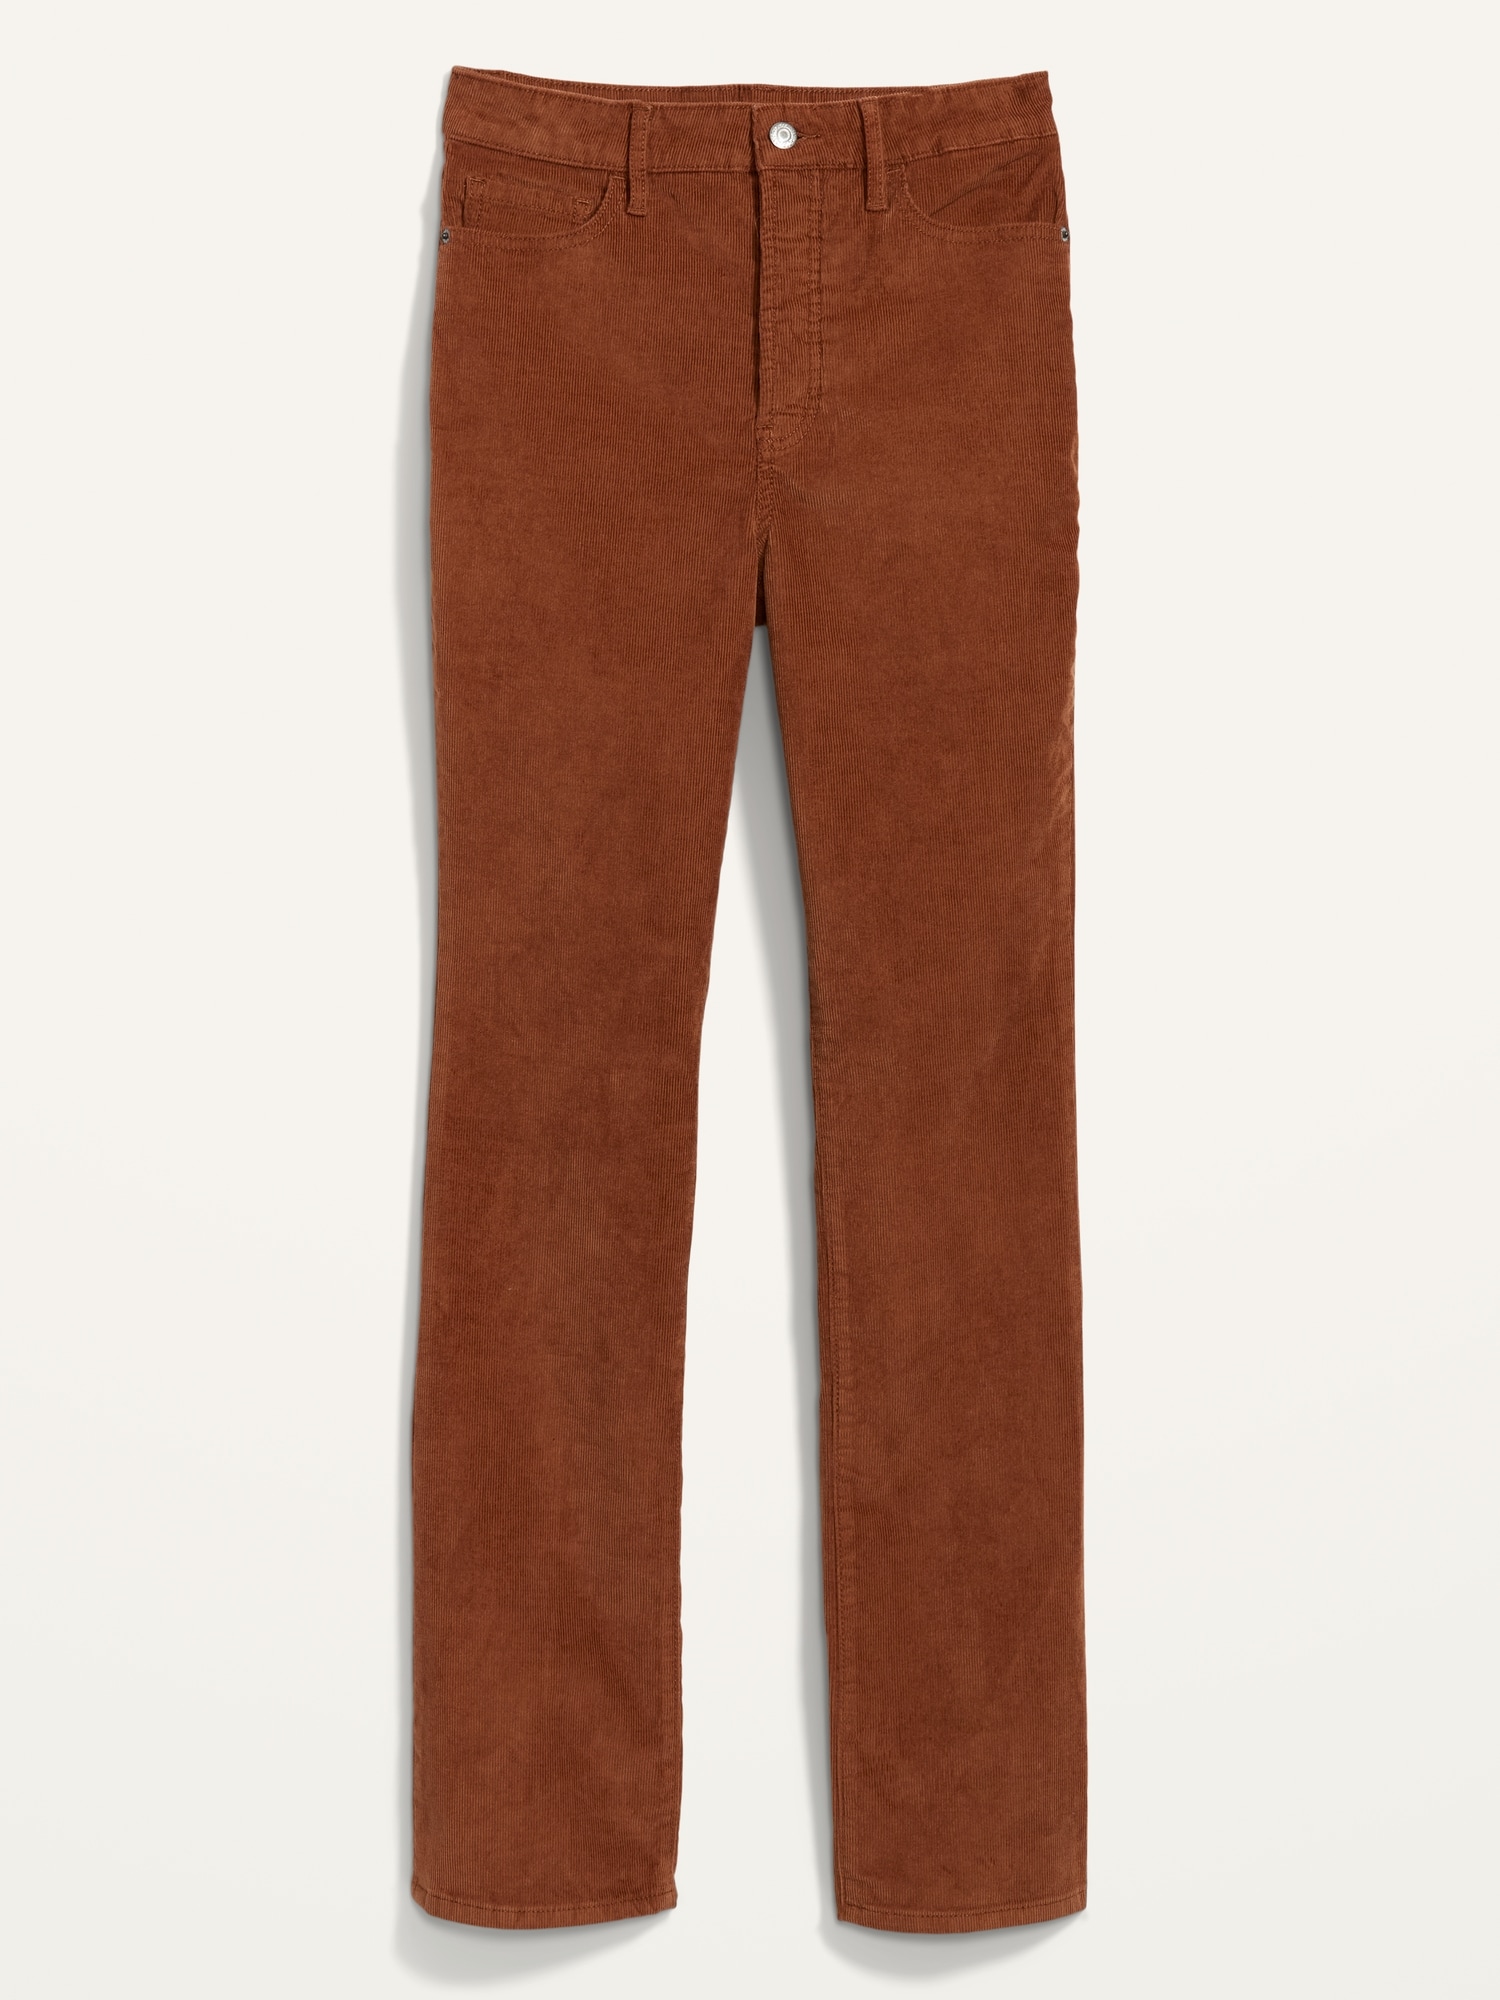 Extra High-Waisted Kicker Corduroy Boot-Cut Pants for Women | Old Navy